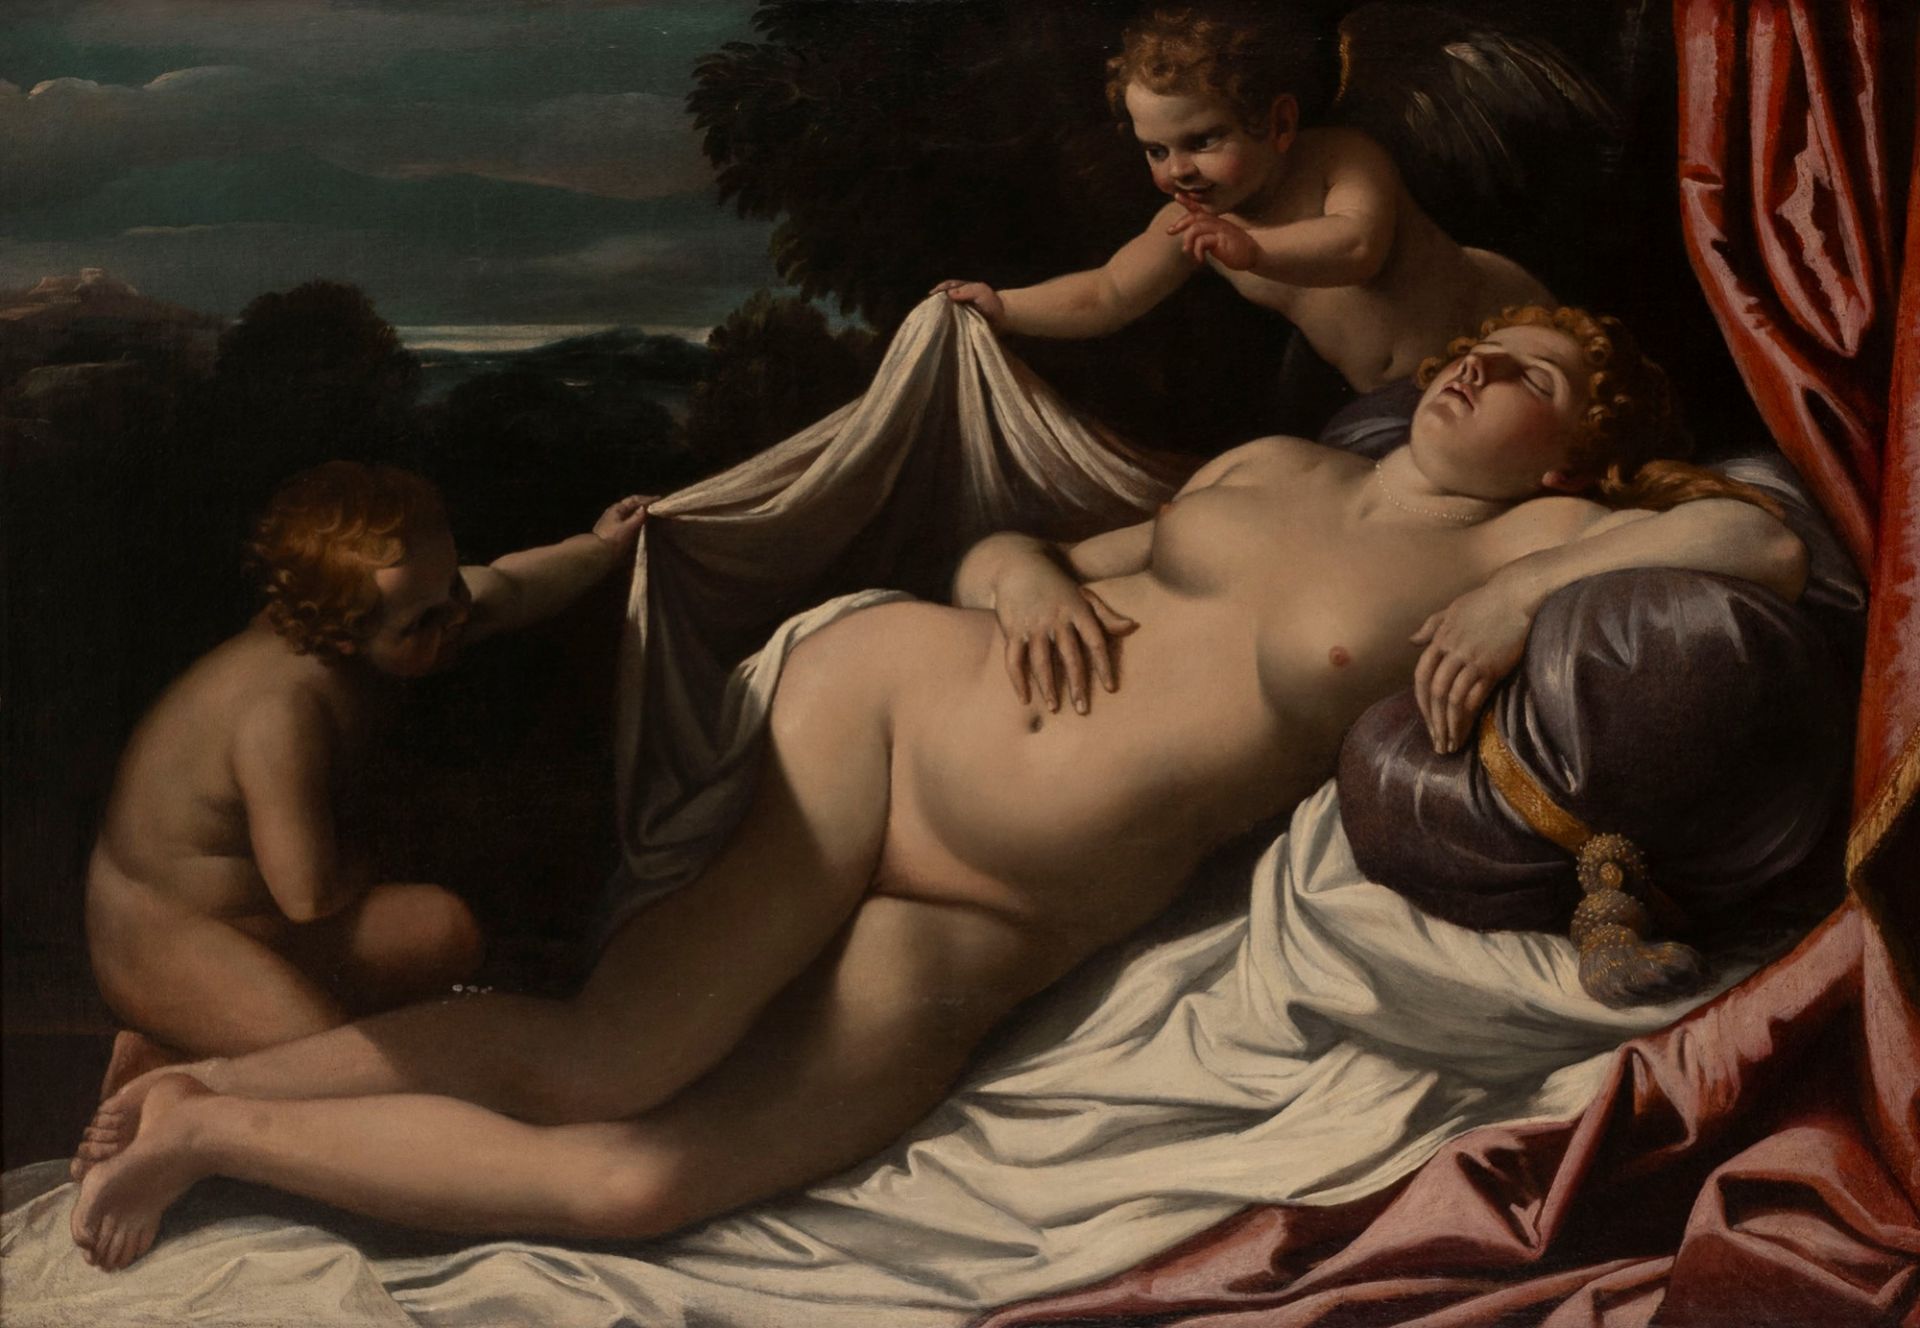 Attributed to Giovanni Lanfranco (Parma, 1582 – Rome, 1647) - Sleeping Venus with two cupids